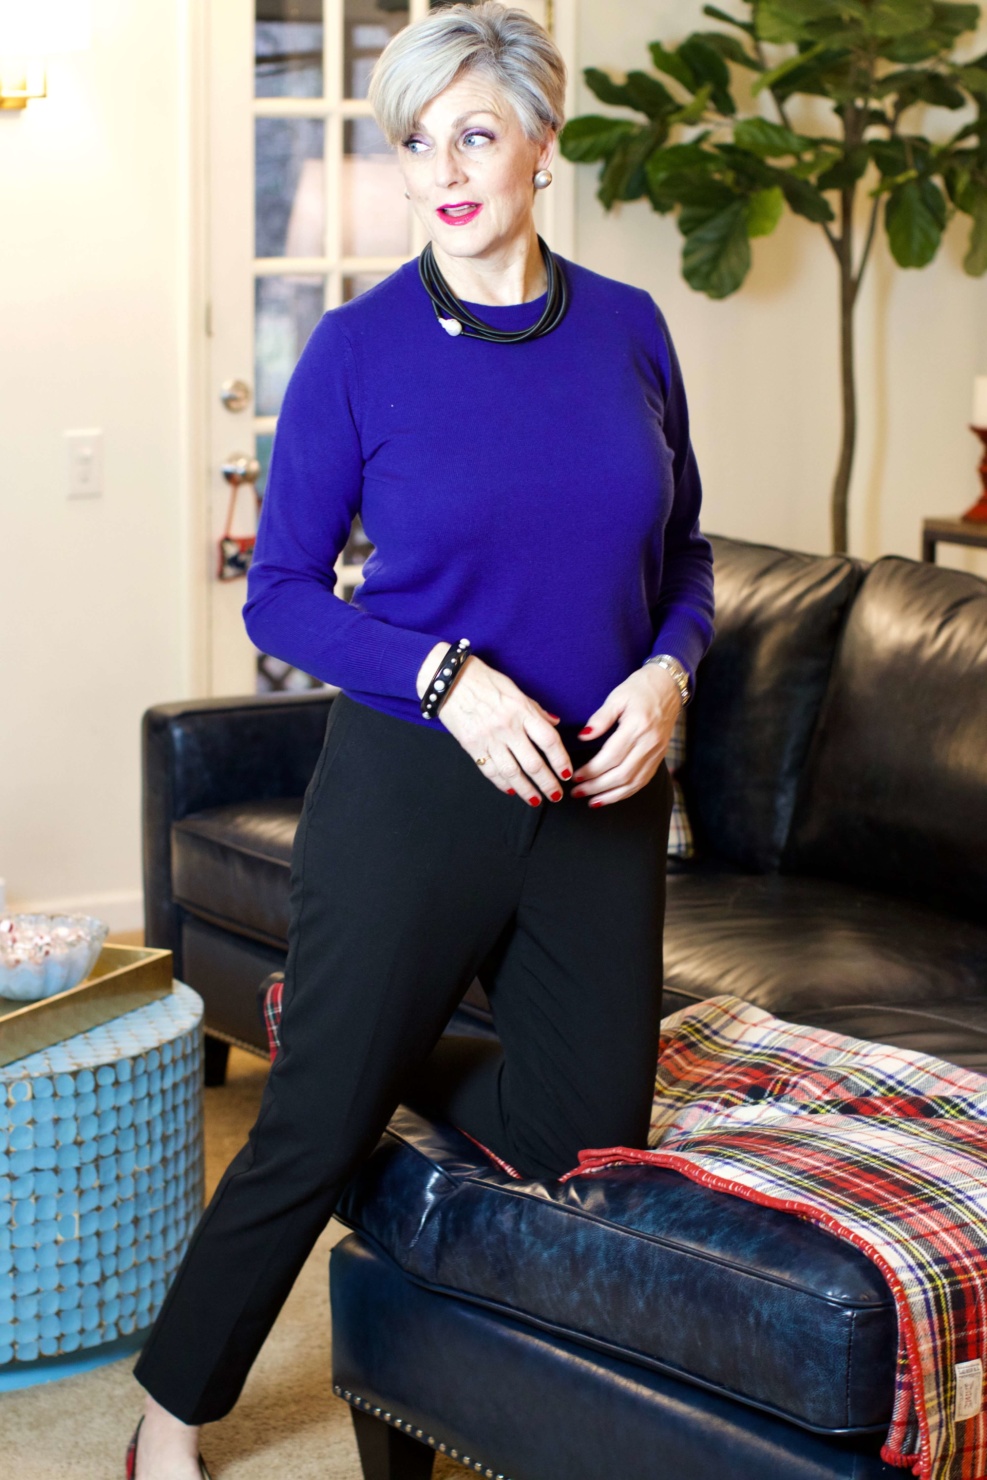 beth from Style at a Certain Age wears a cobalt blue cashmere crewneck, cropped black ankle pants, and tartan plaid flats